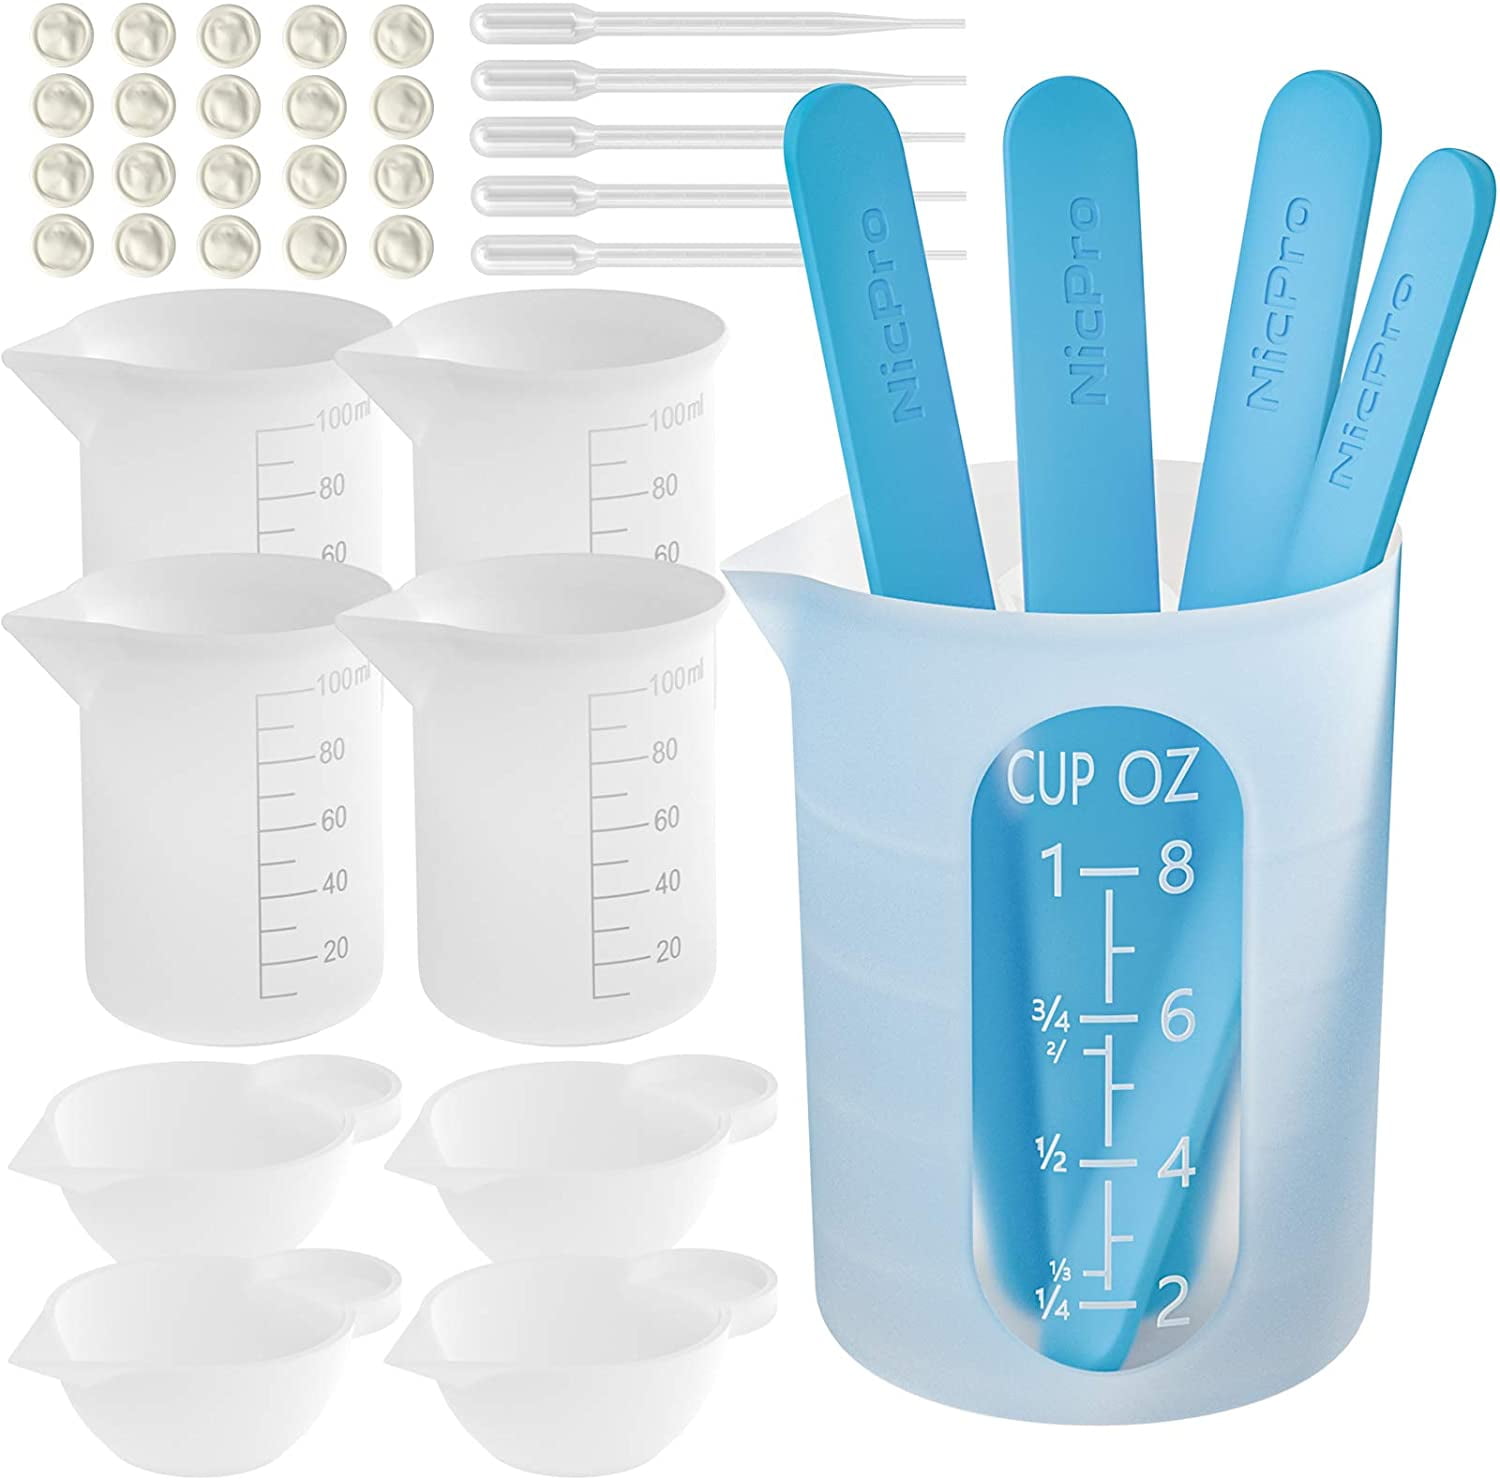 Nicpro 100 & 250ml Silicone Resin Measuring Cups Tool Kit, Measure Cups,  Silicone Popsicle Stir Sticks, Pipettes, Finger Cots for Epoxy Resin Mixing,  Molds, Jewelry Making, Waxing, Easy Clean 